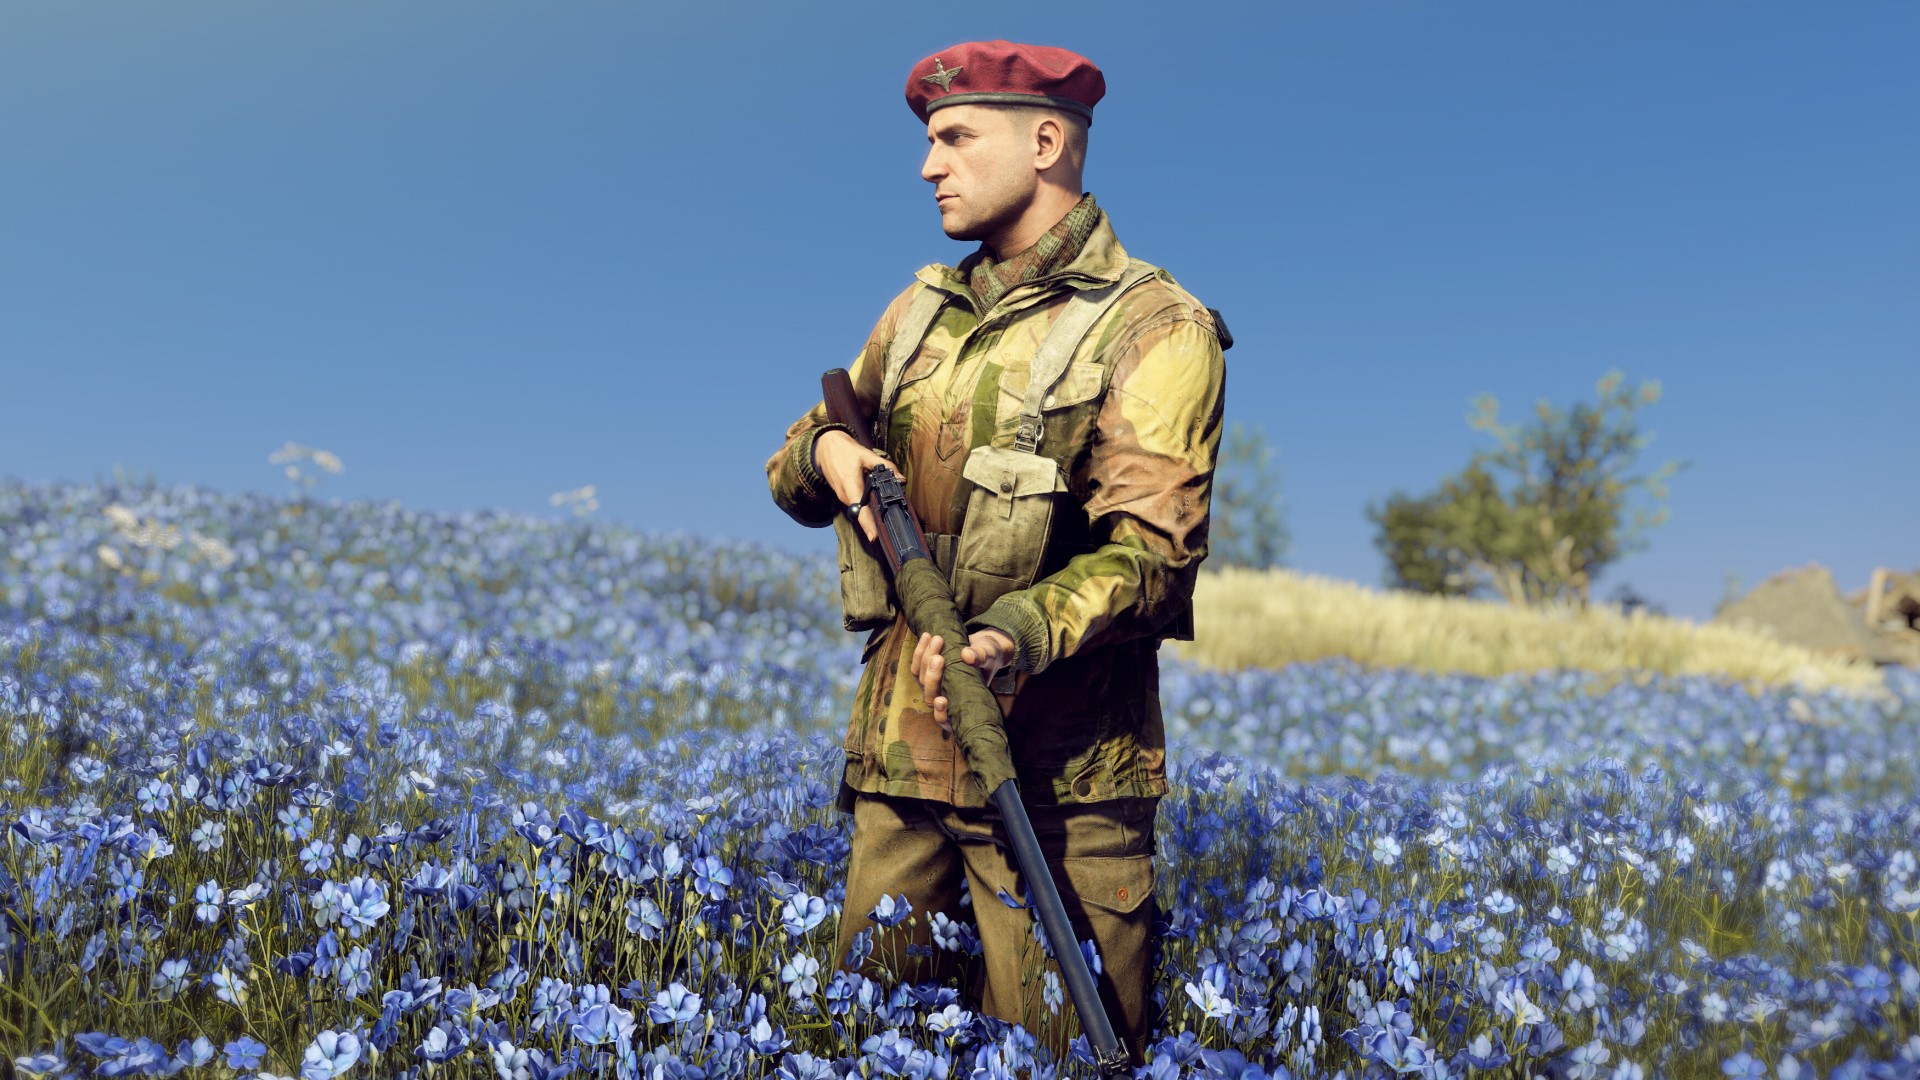 sniper-elite-5-free-dlc-pack-adds-a-dose-of-the-british-airborne